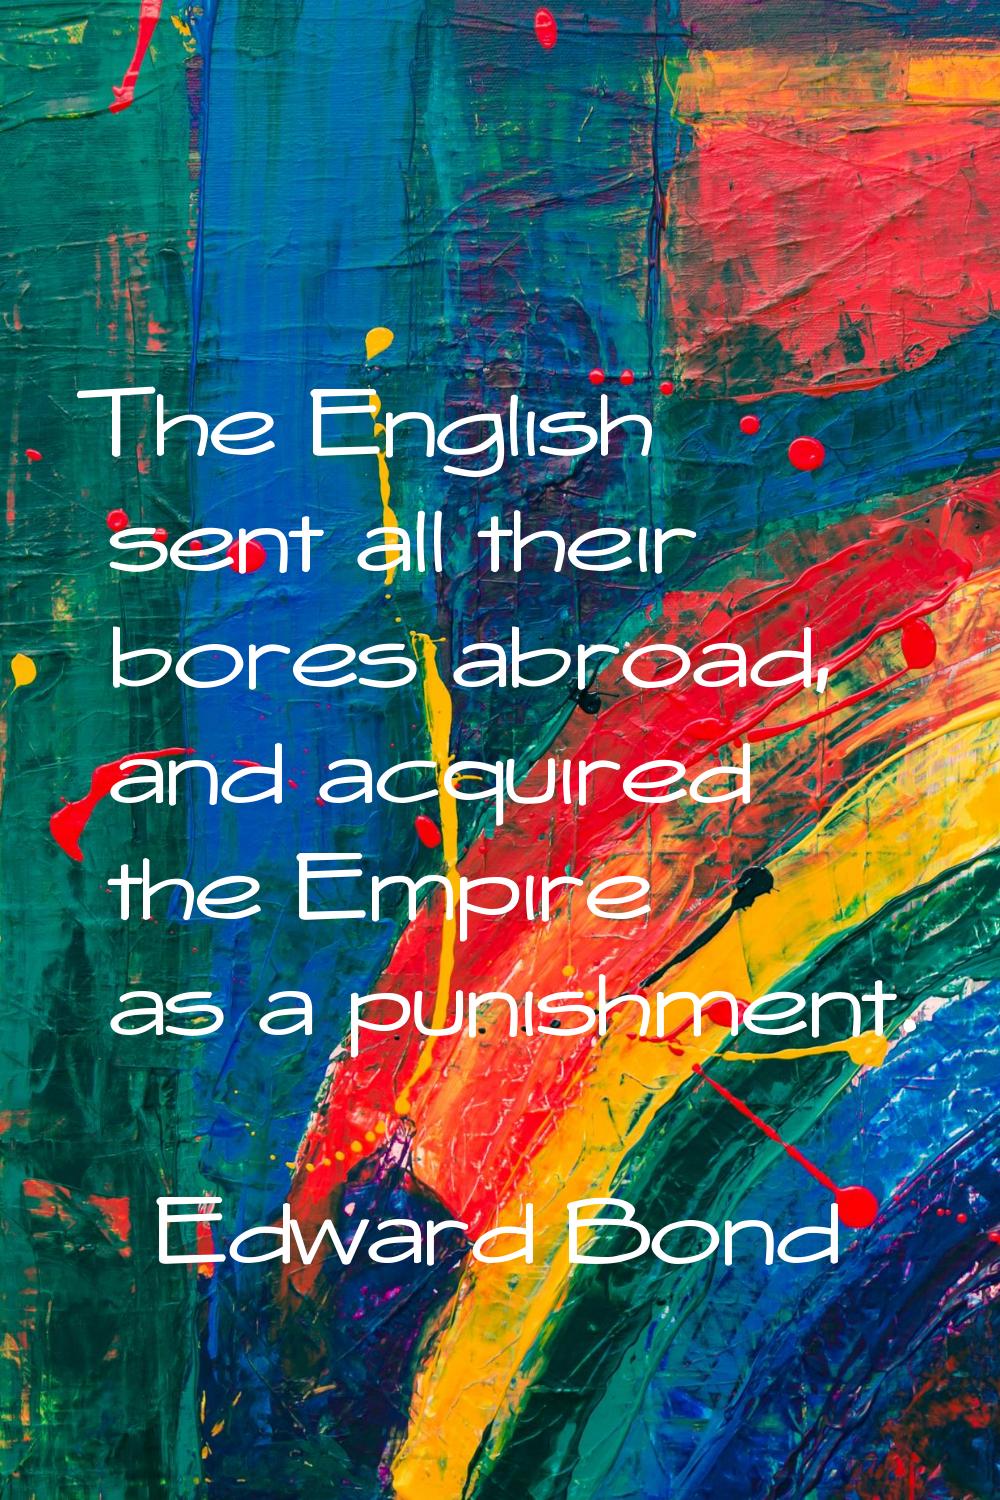 The English sent all their bores abroad, and acquired the Empire as a punishment.